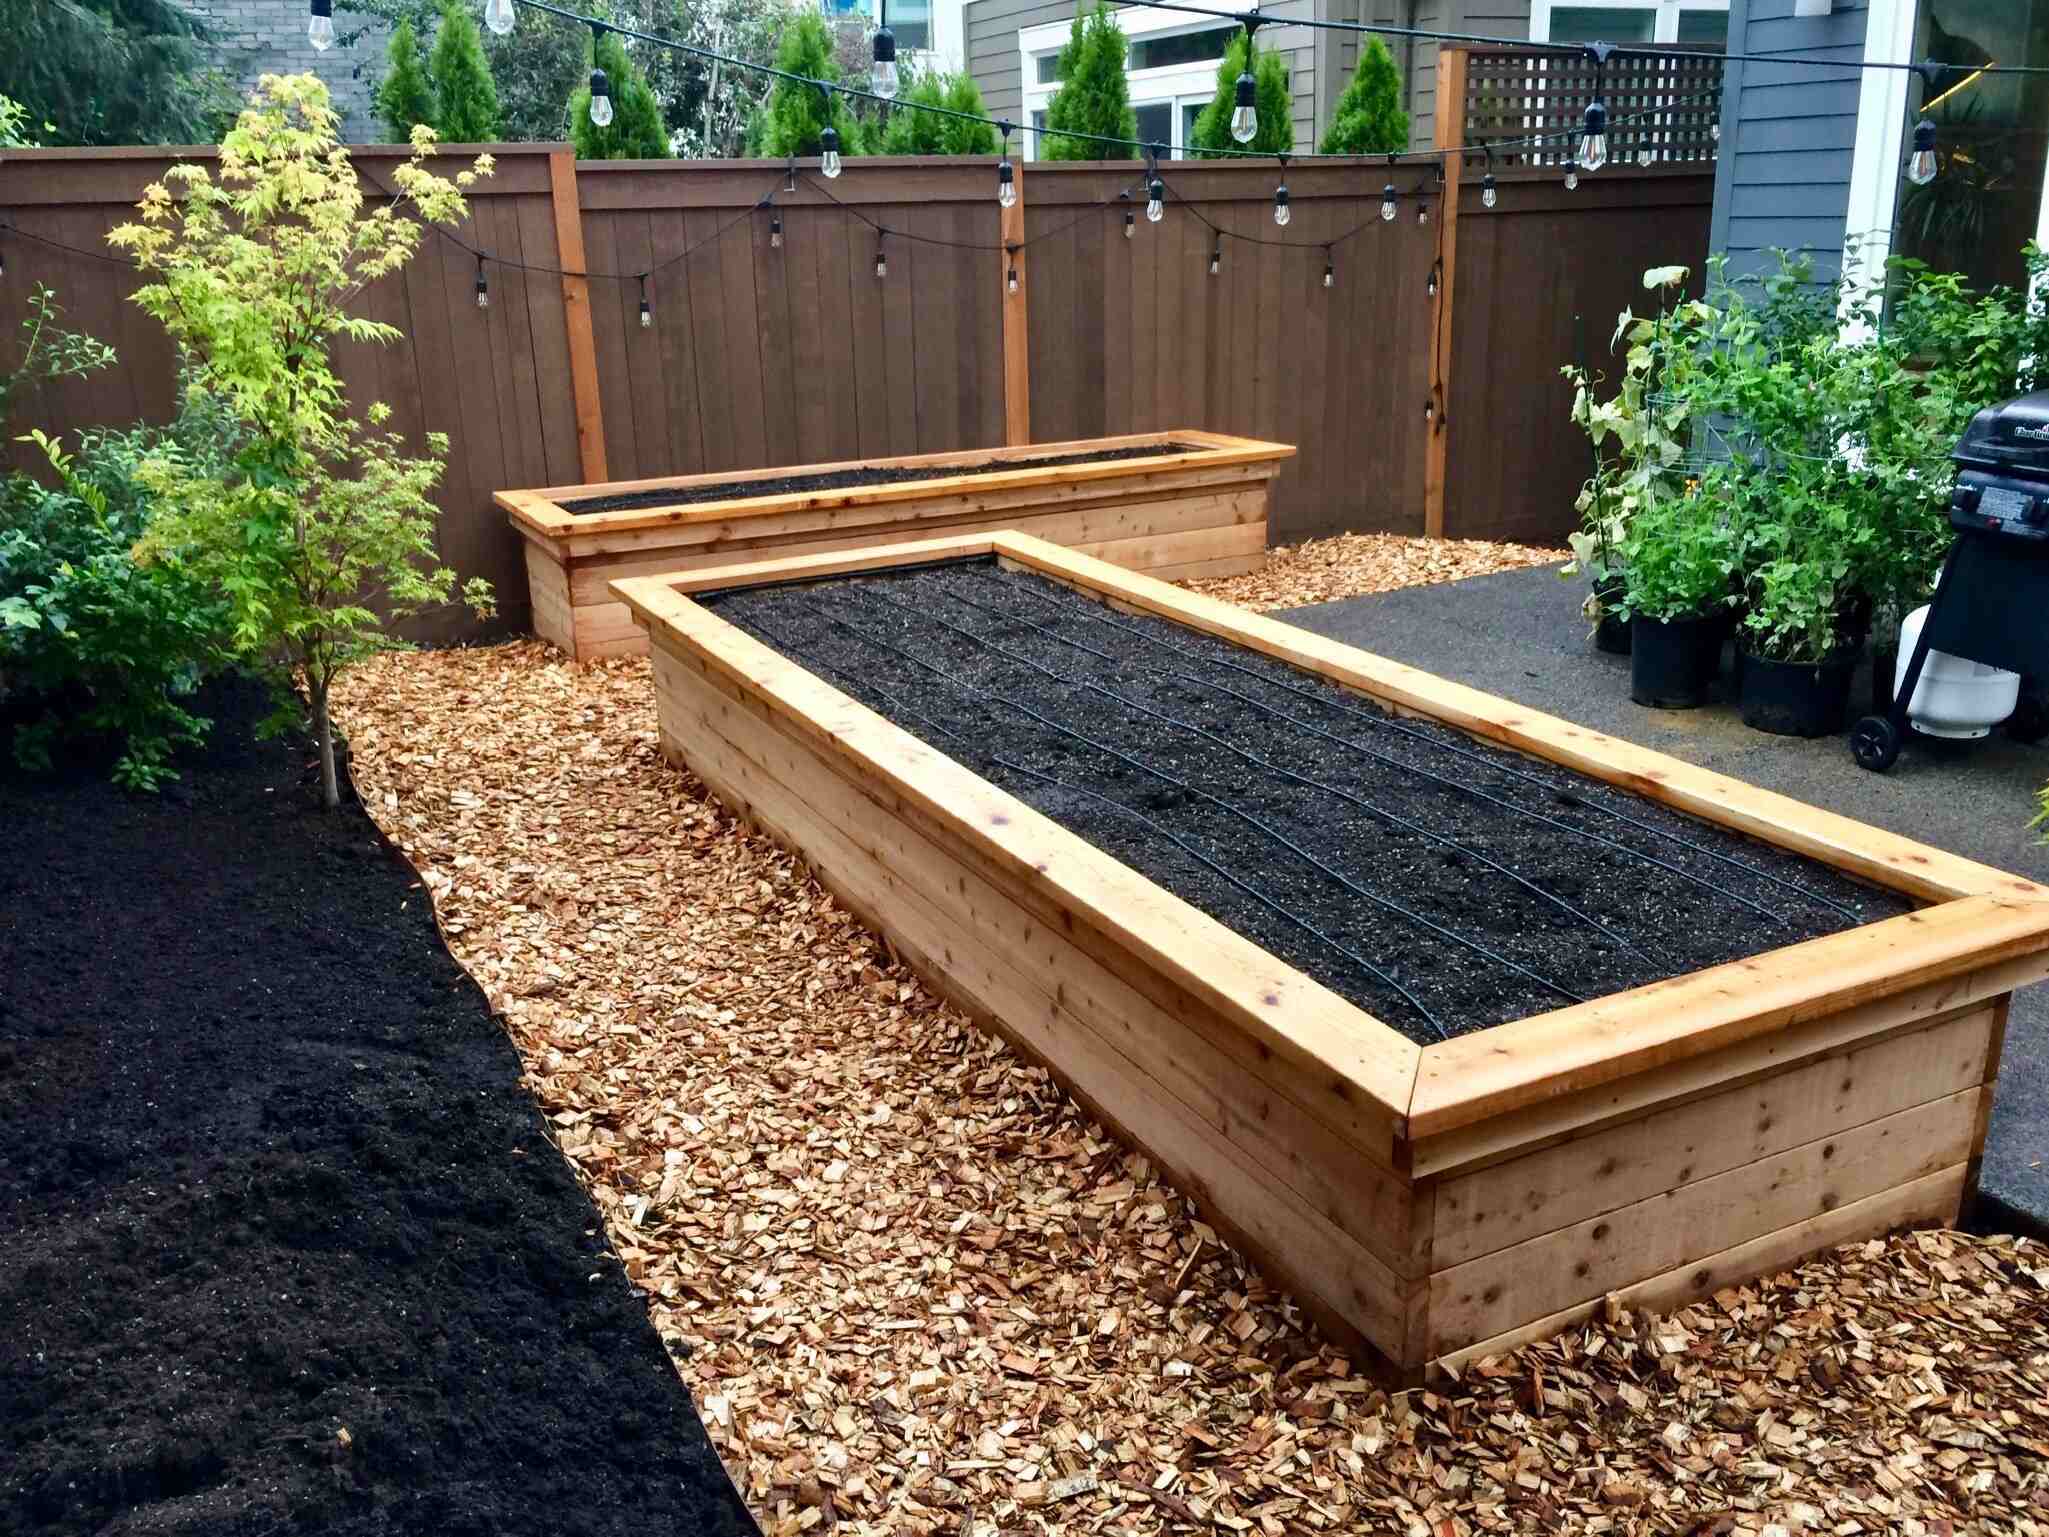 How To Prepare A Garden Bed For Planting Shrubs